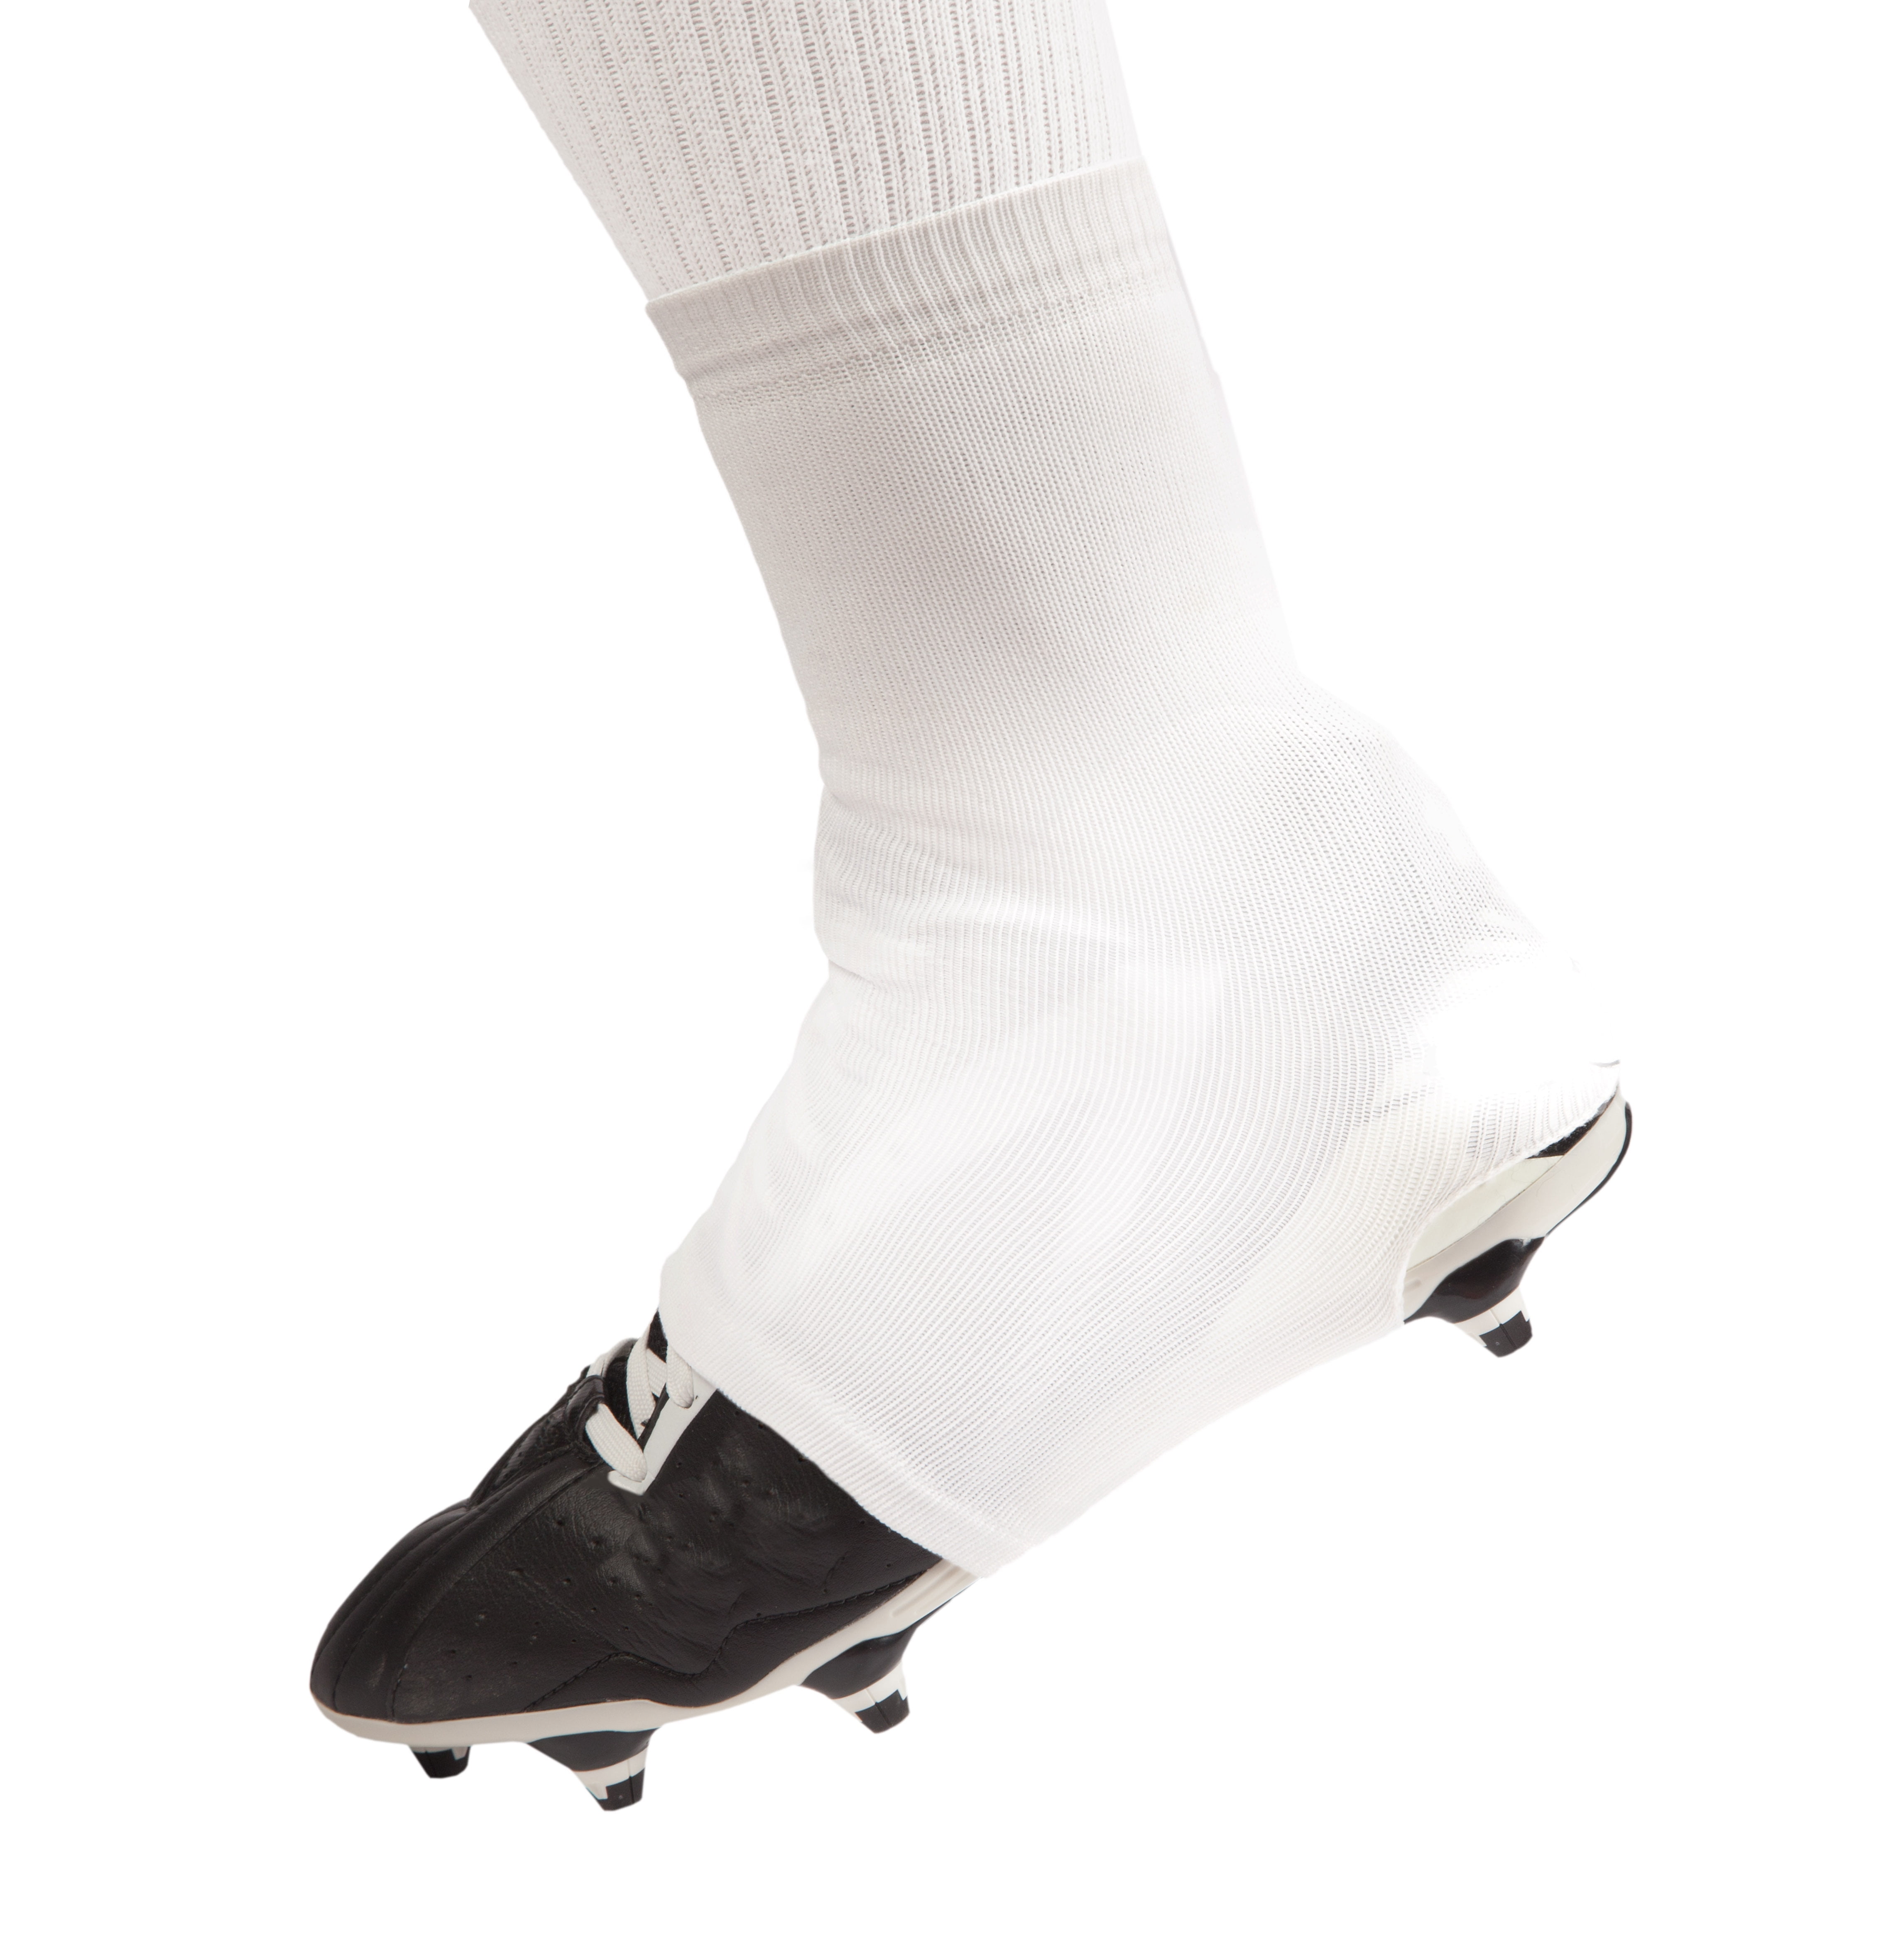 or Turf Premium Wraps for Cleats For Football Field Hockey Soccer TD Spats Football Cleat Covers